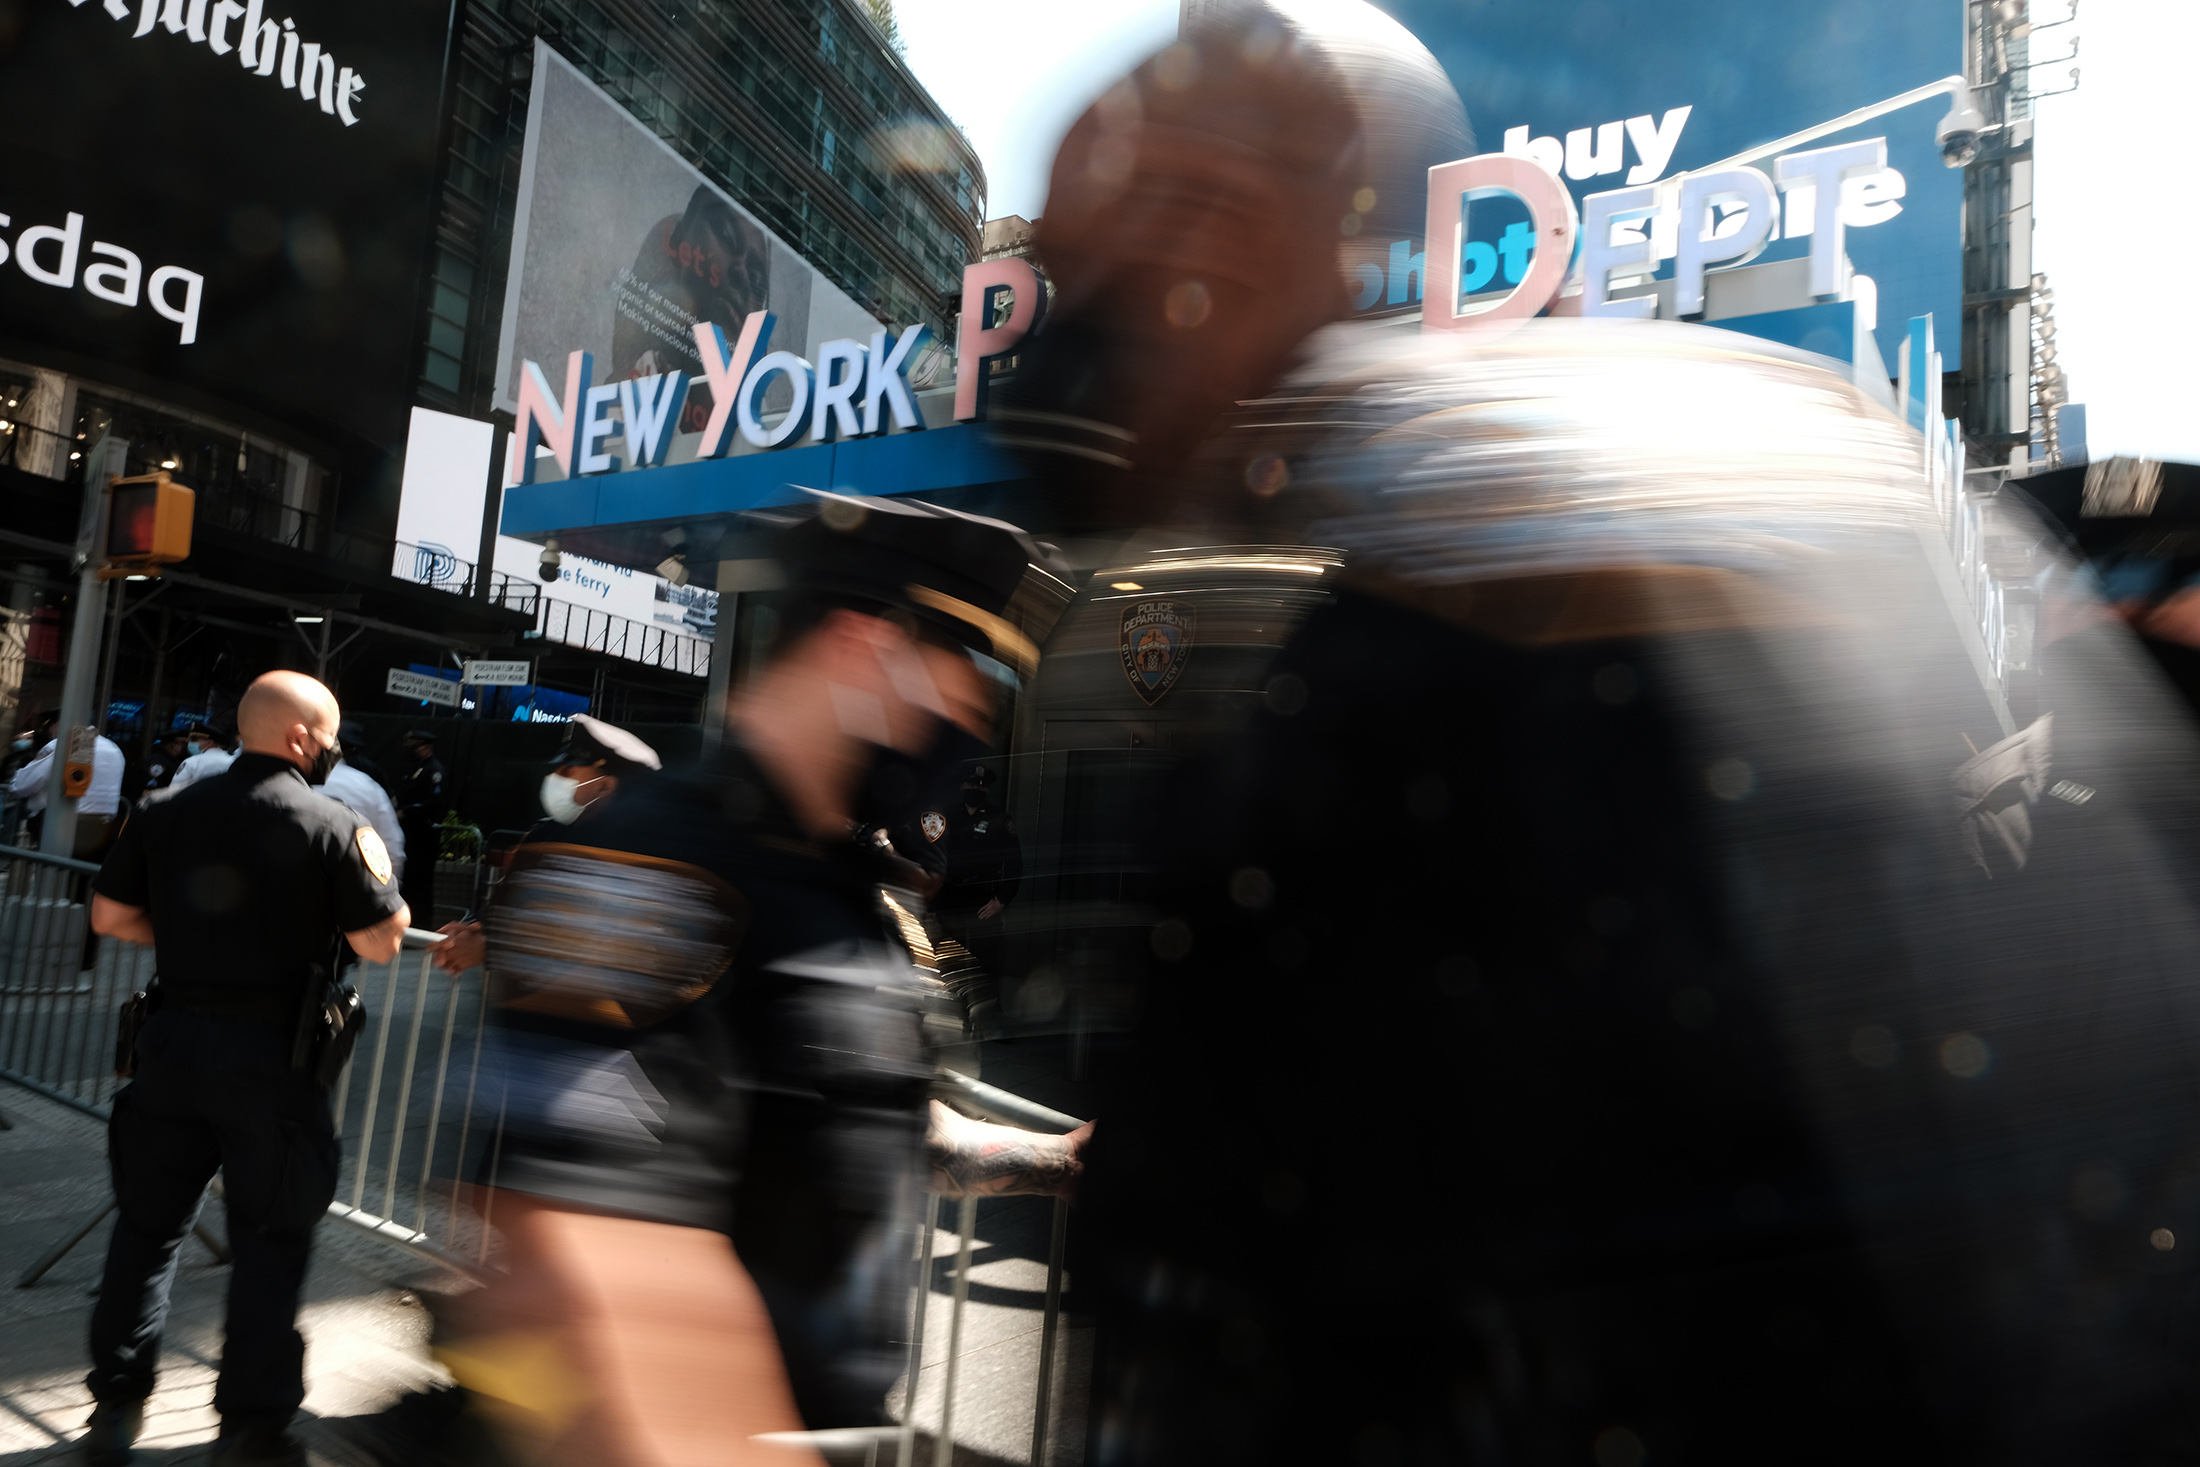 Crime on decline in Times Square, but NYC officials still trying